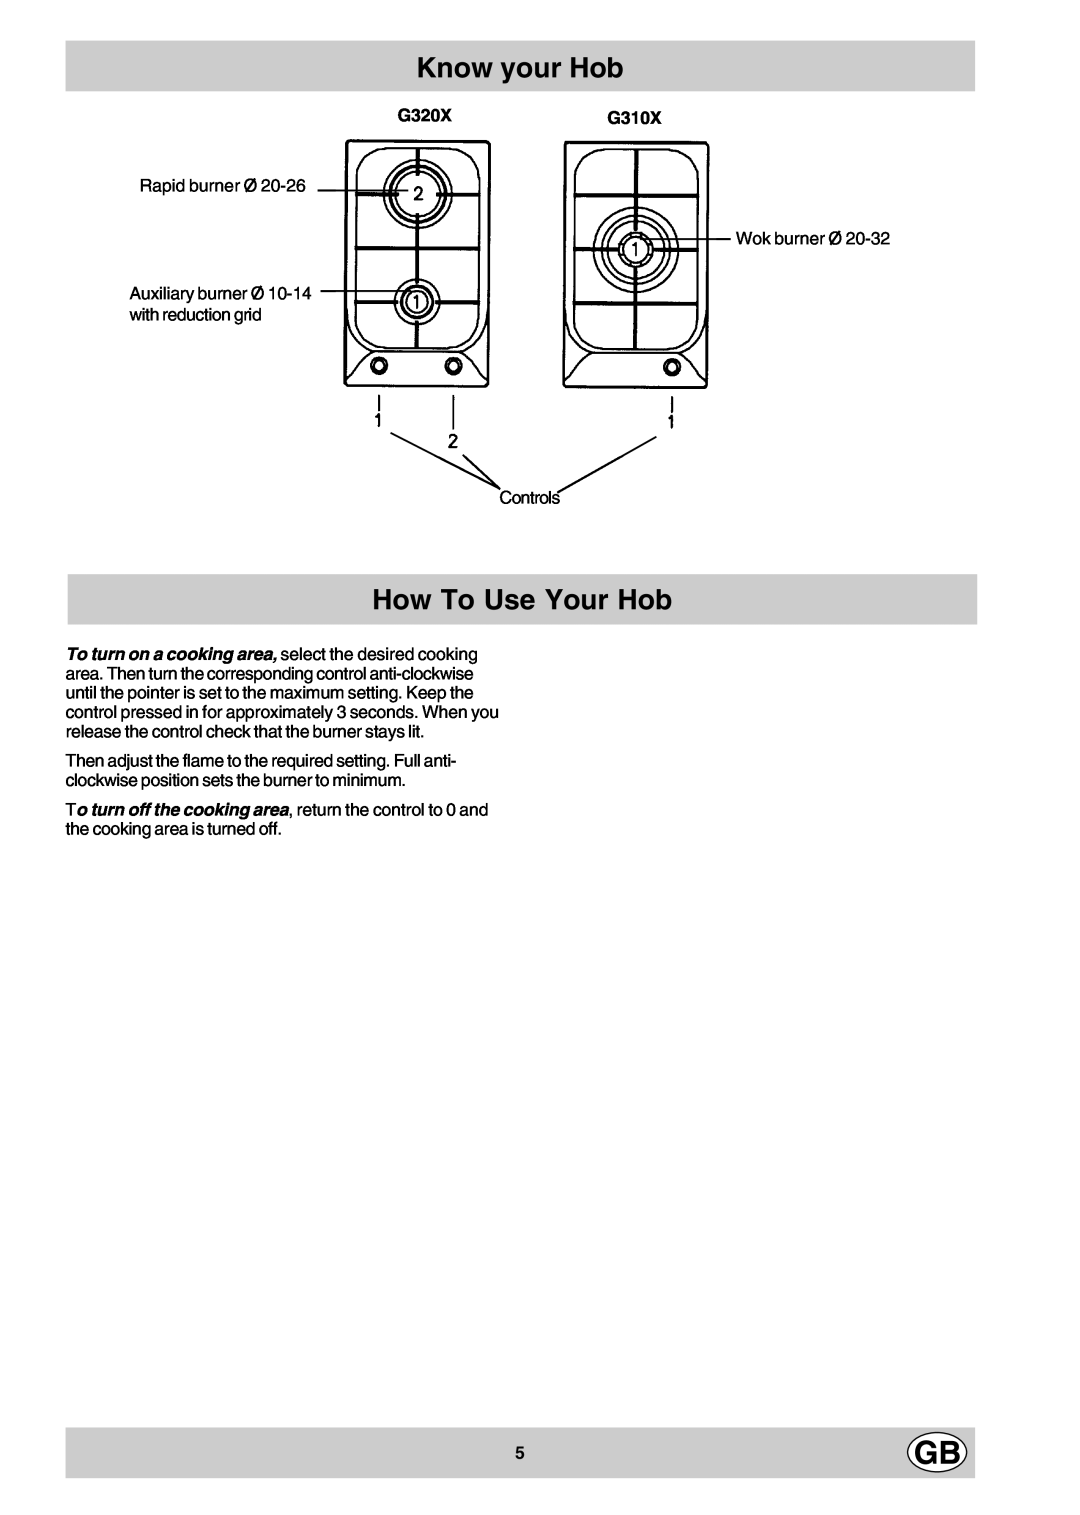 Hotpoint manual Know your Hob, How To Use Your Hob, G320XG310X 